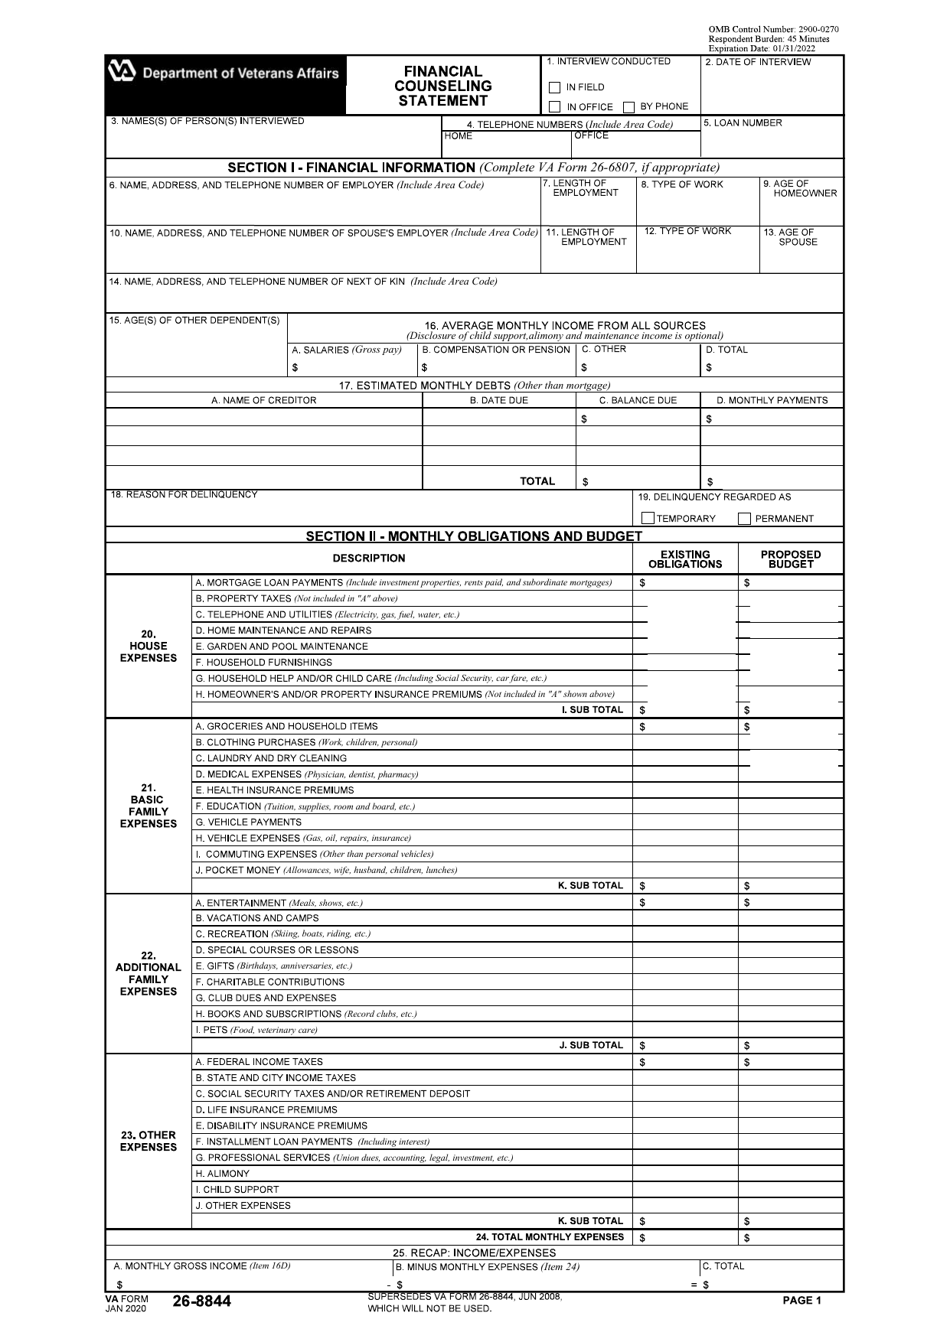 VA Form 26-8844 Financial Counseling Statement, Page 1